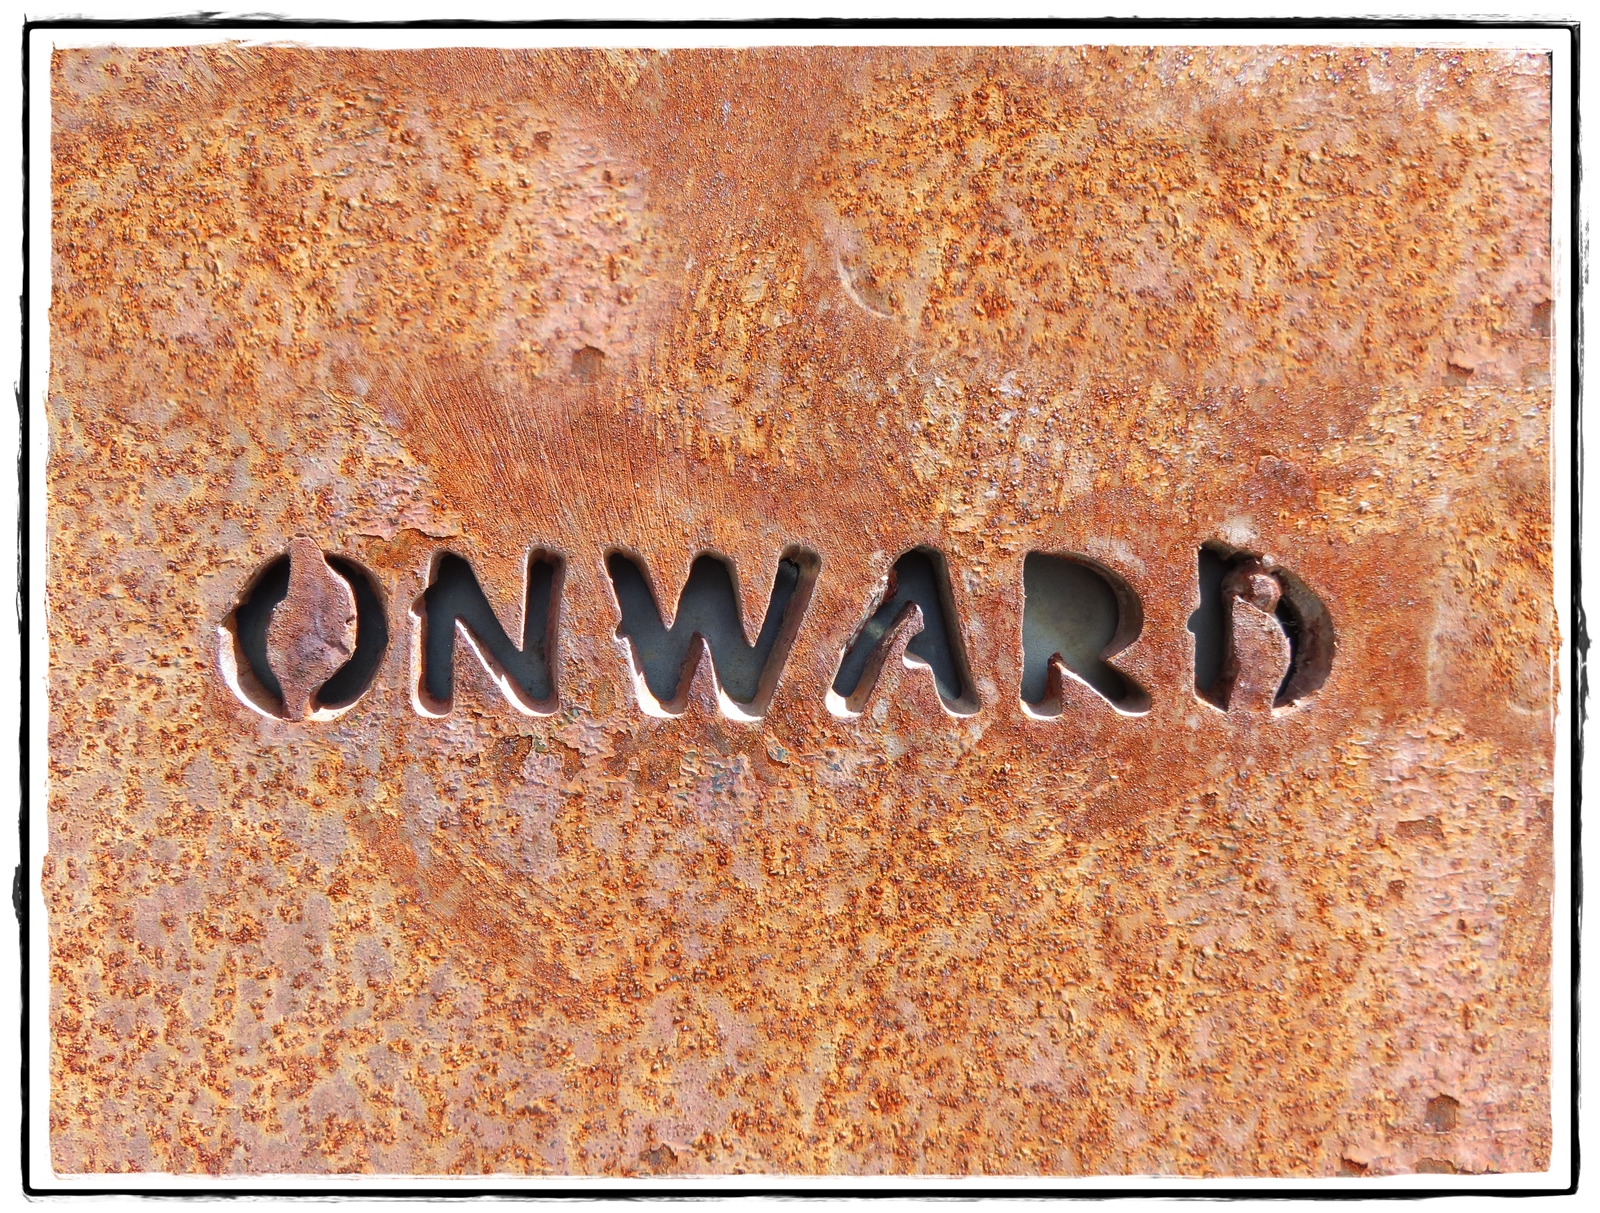 The word "onward" chiseled into rust-colored stone